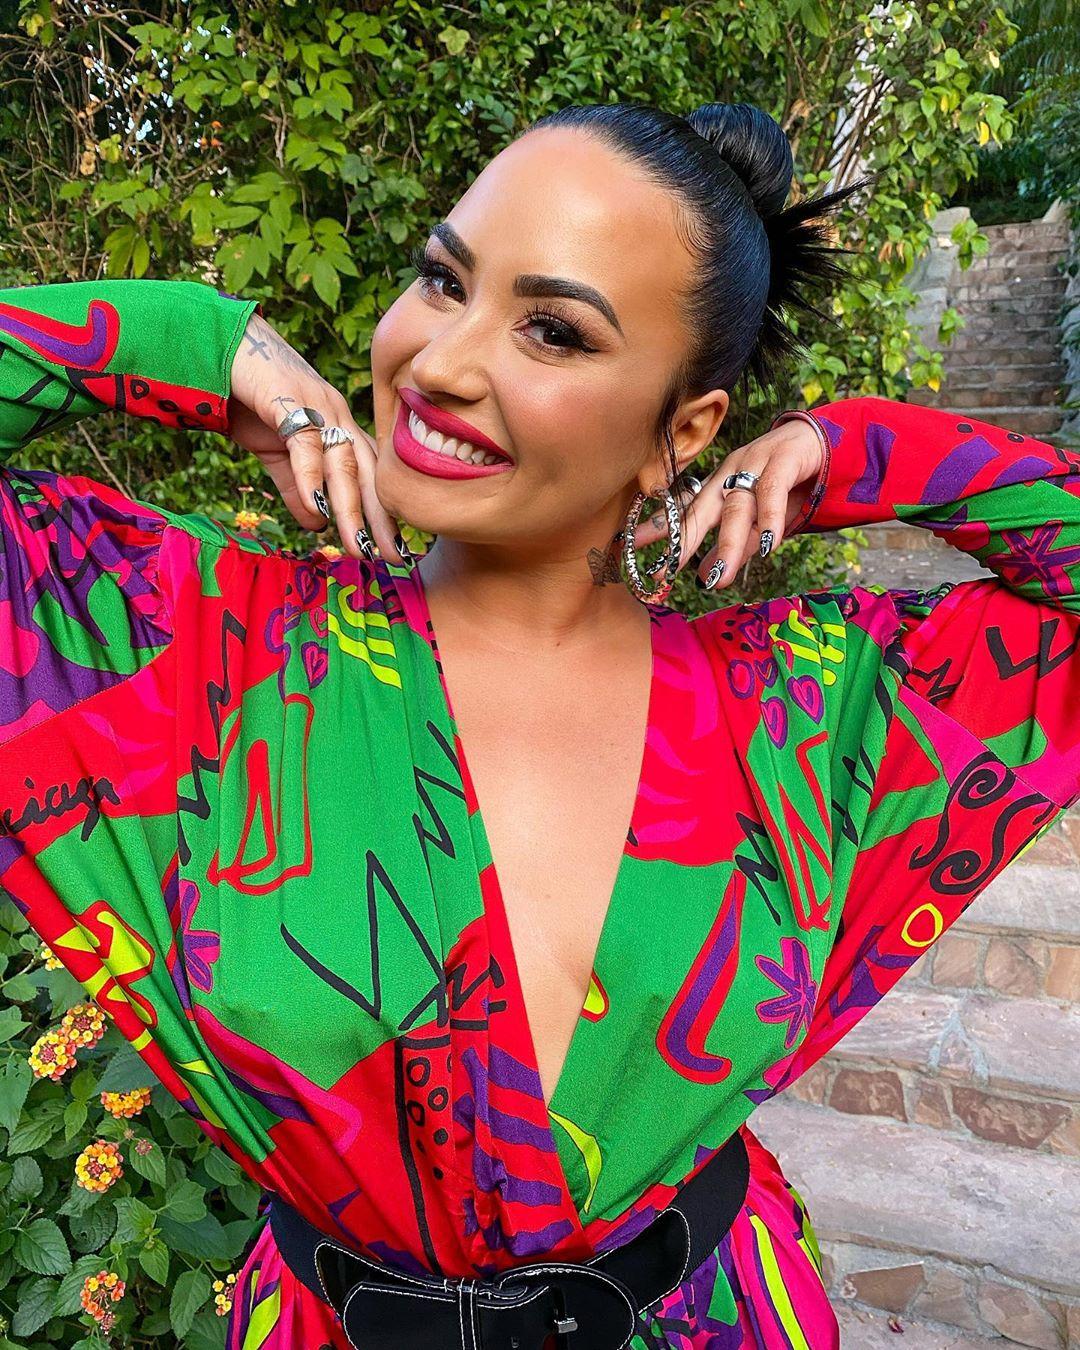 75+ Hot Pictures Of Demi Lovato With Here Amazing Butt Are Just Too Good | Best Of Comic Books